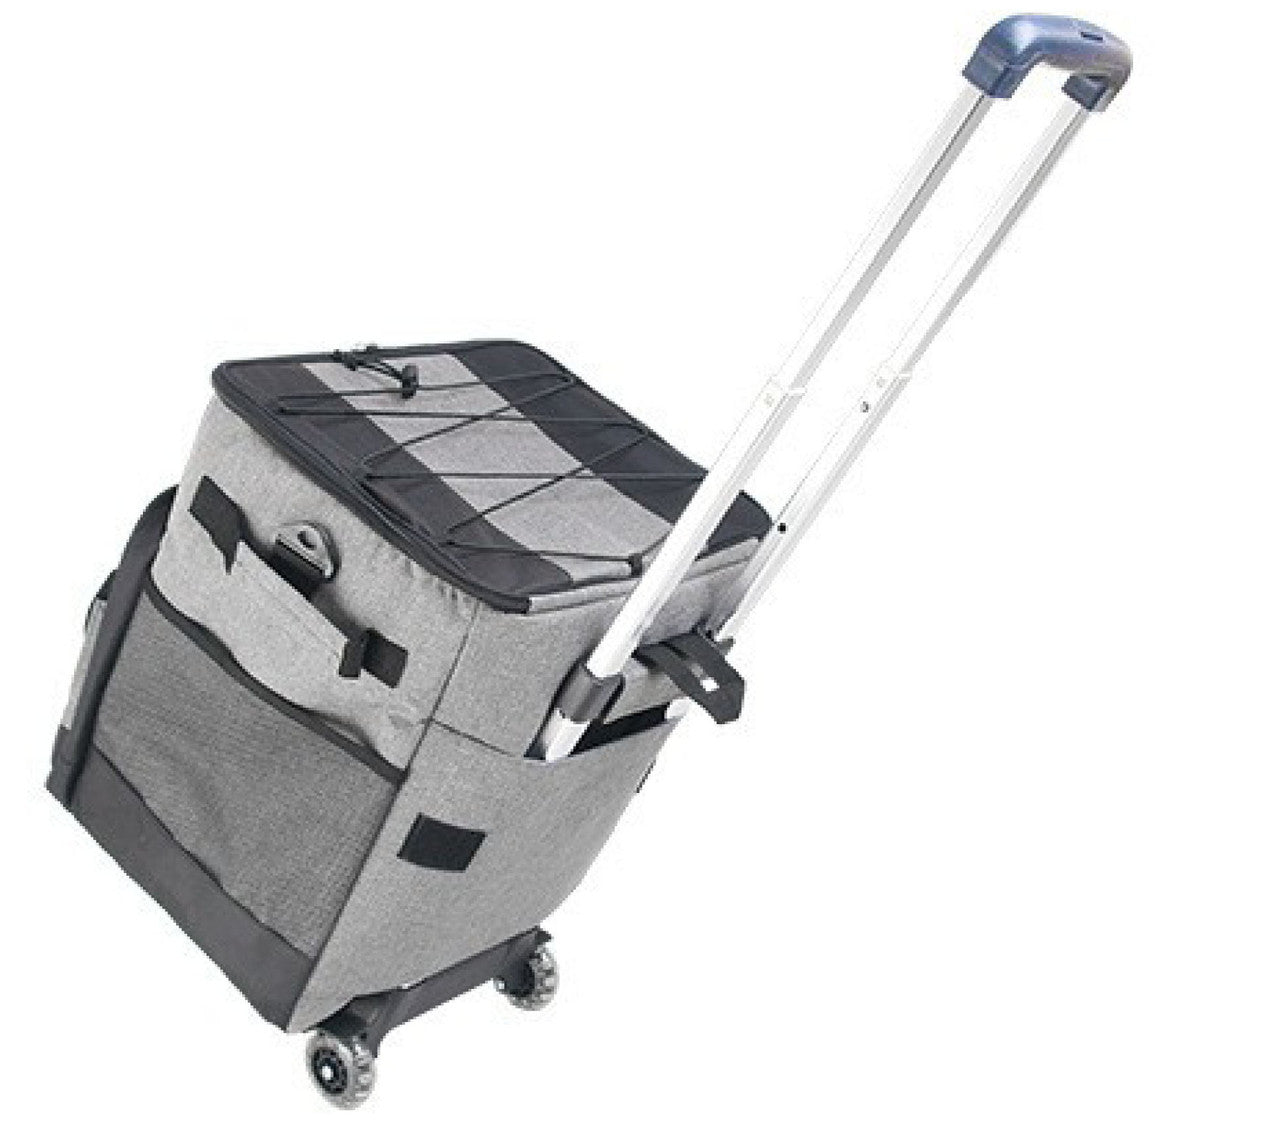 Cooler Picnic Bag Trolley Thermally Insulated - 36L - 60 cans - Grey - Drinks Food Cool Bag Rainproof | Auzzi Store